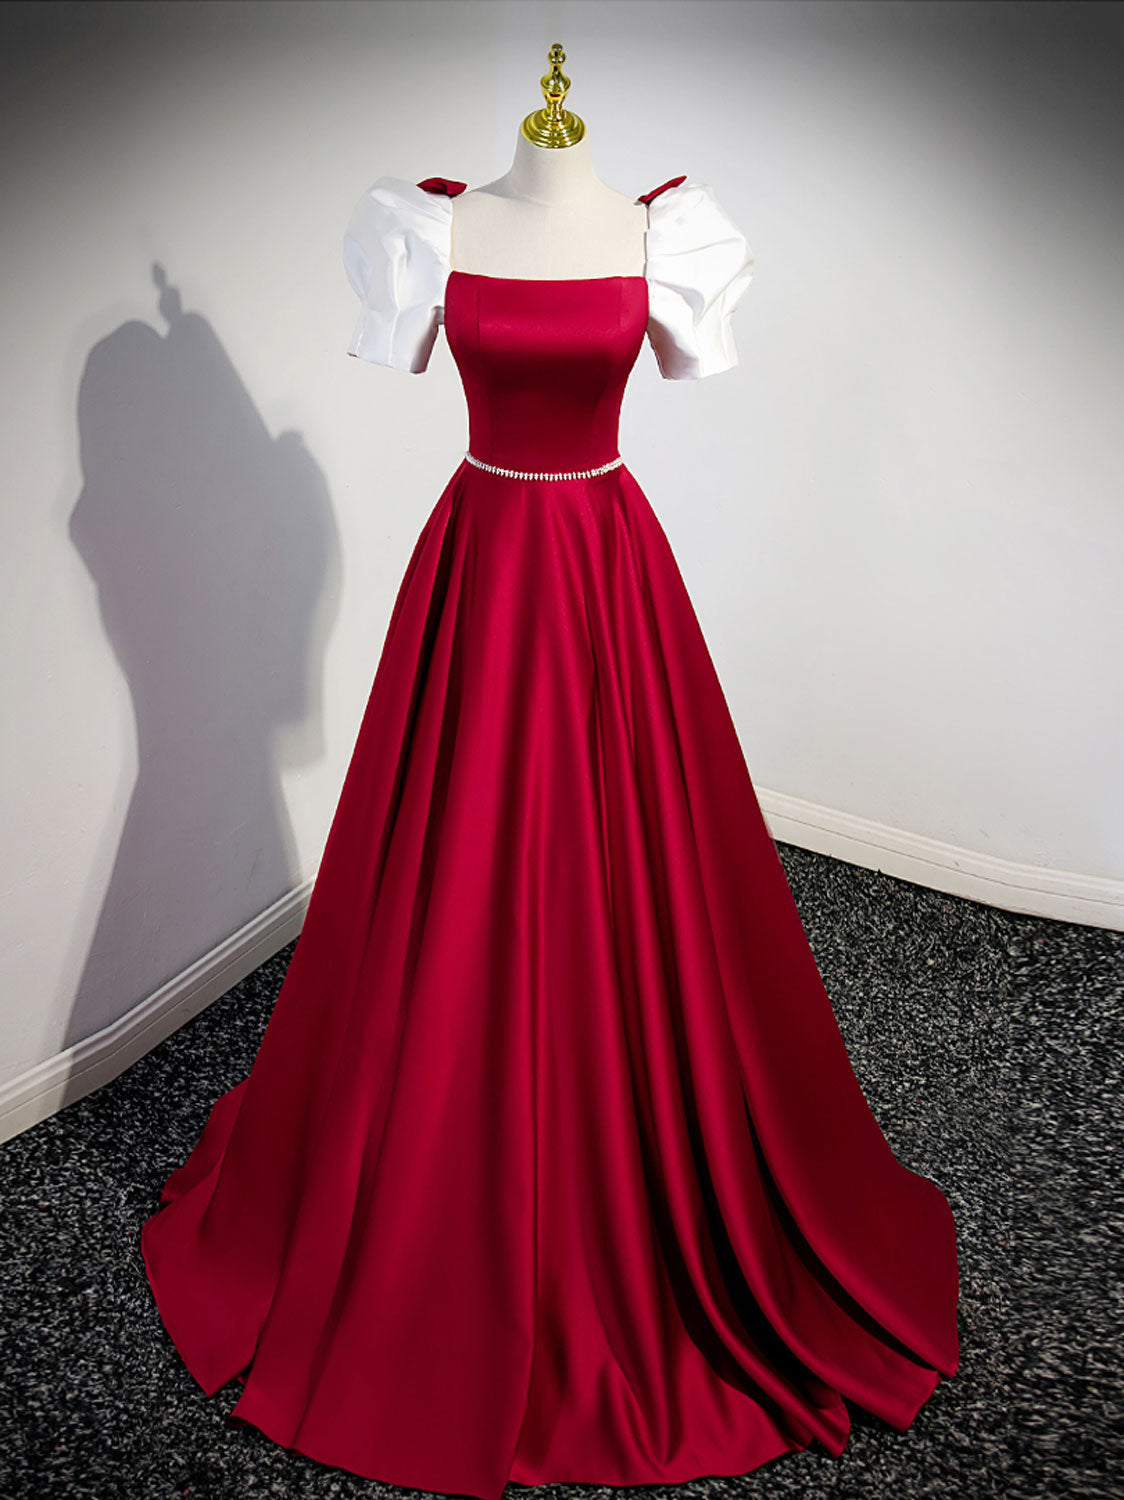 Red Satin Square Neck Prom Dress with White Short Sleeves - DollyGown